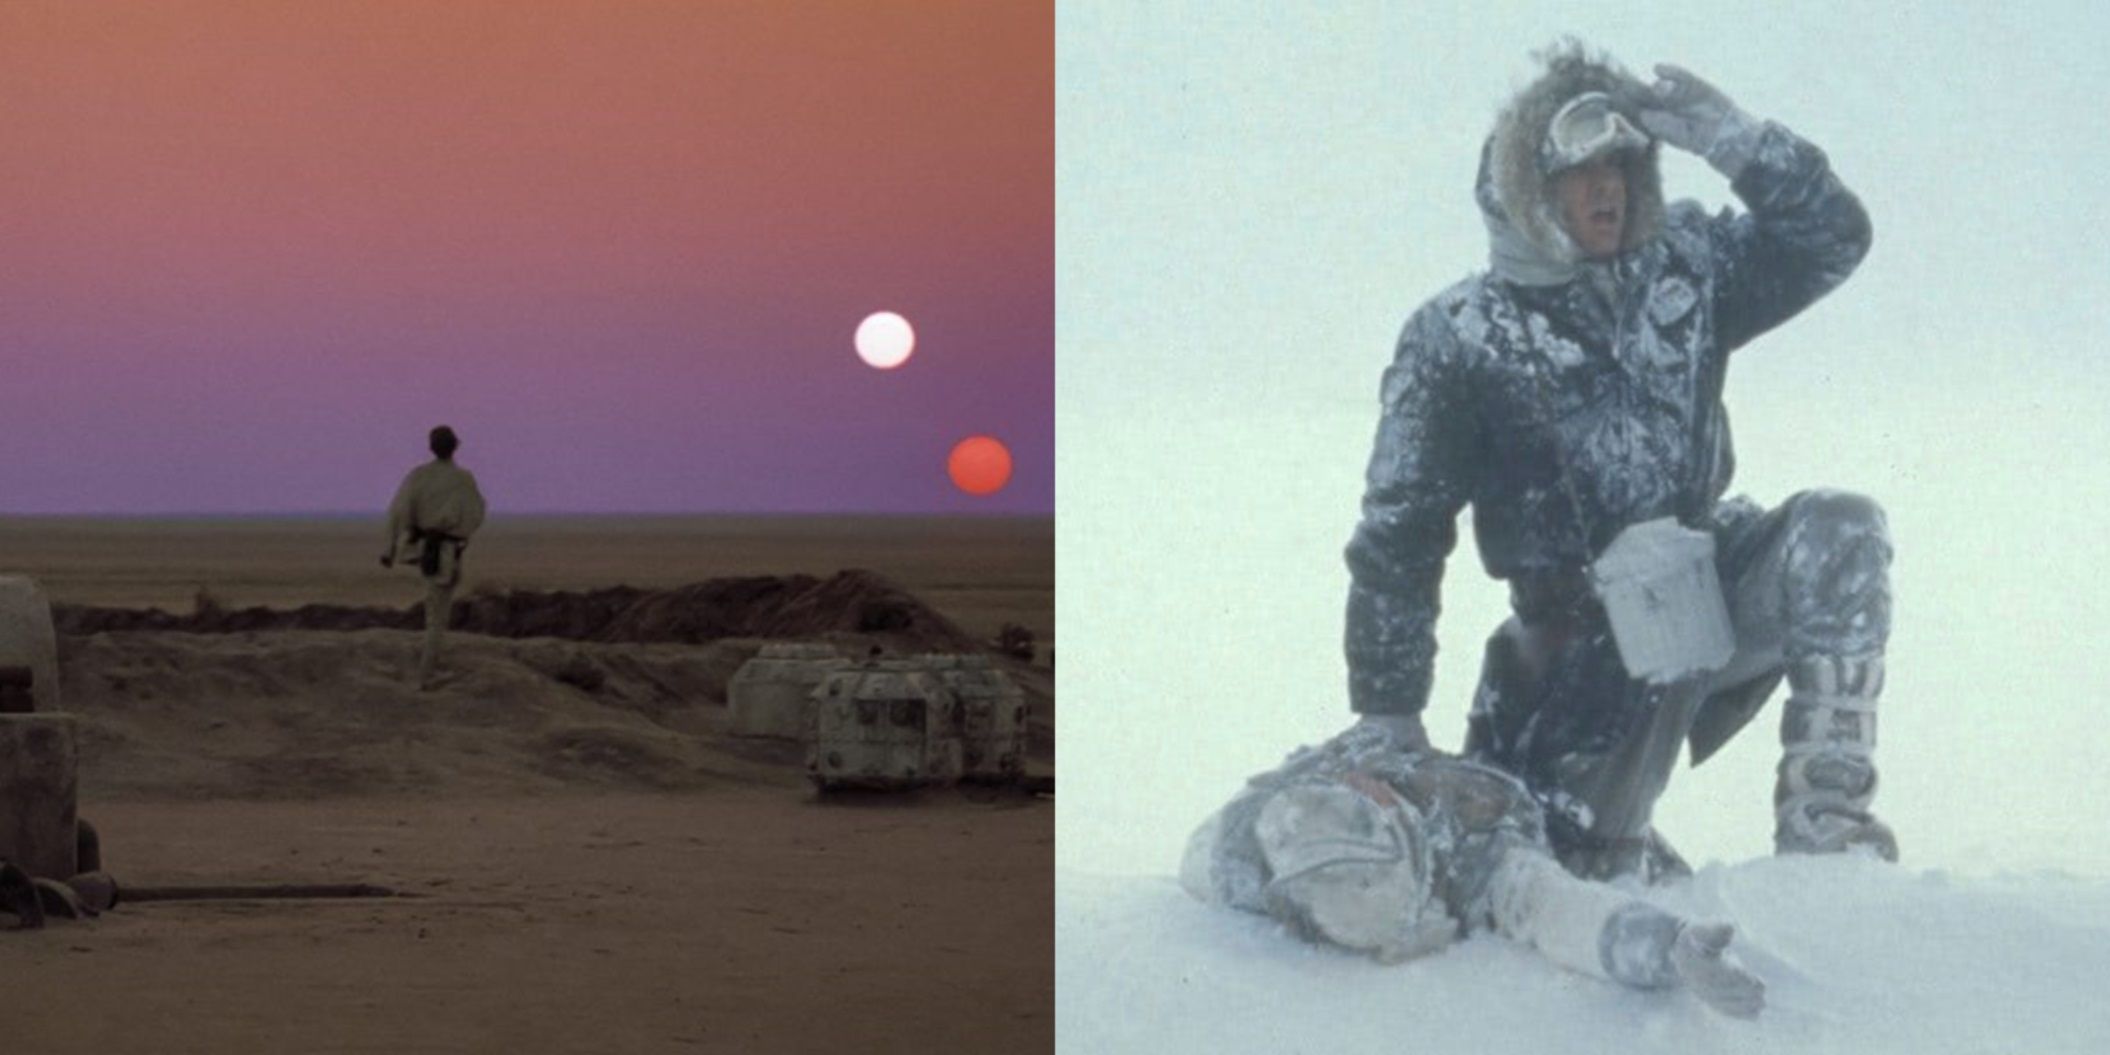 Split image of Luke on Tatooine in Star Wars and Han on Hoth in The Empire Strikes Back